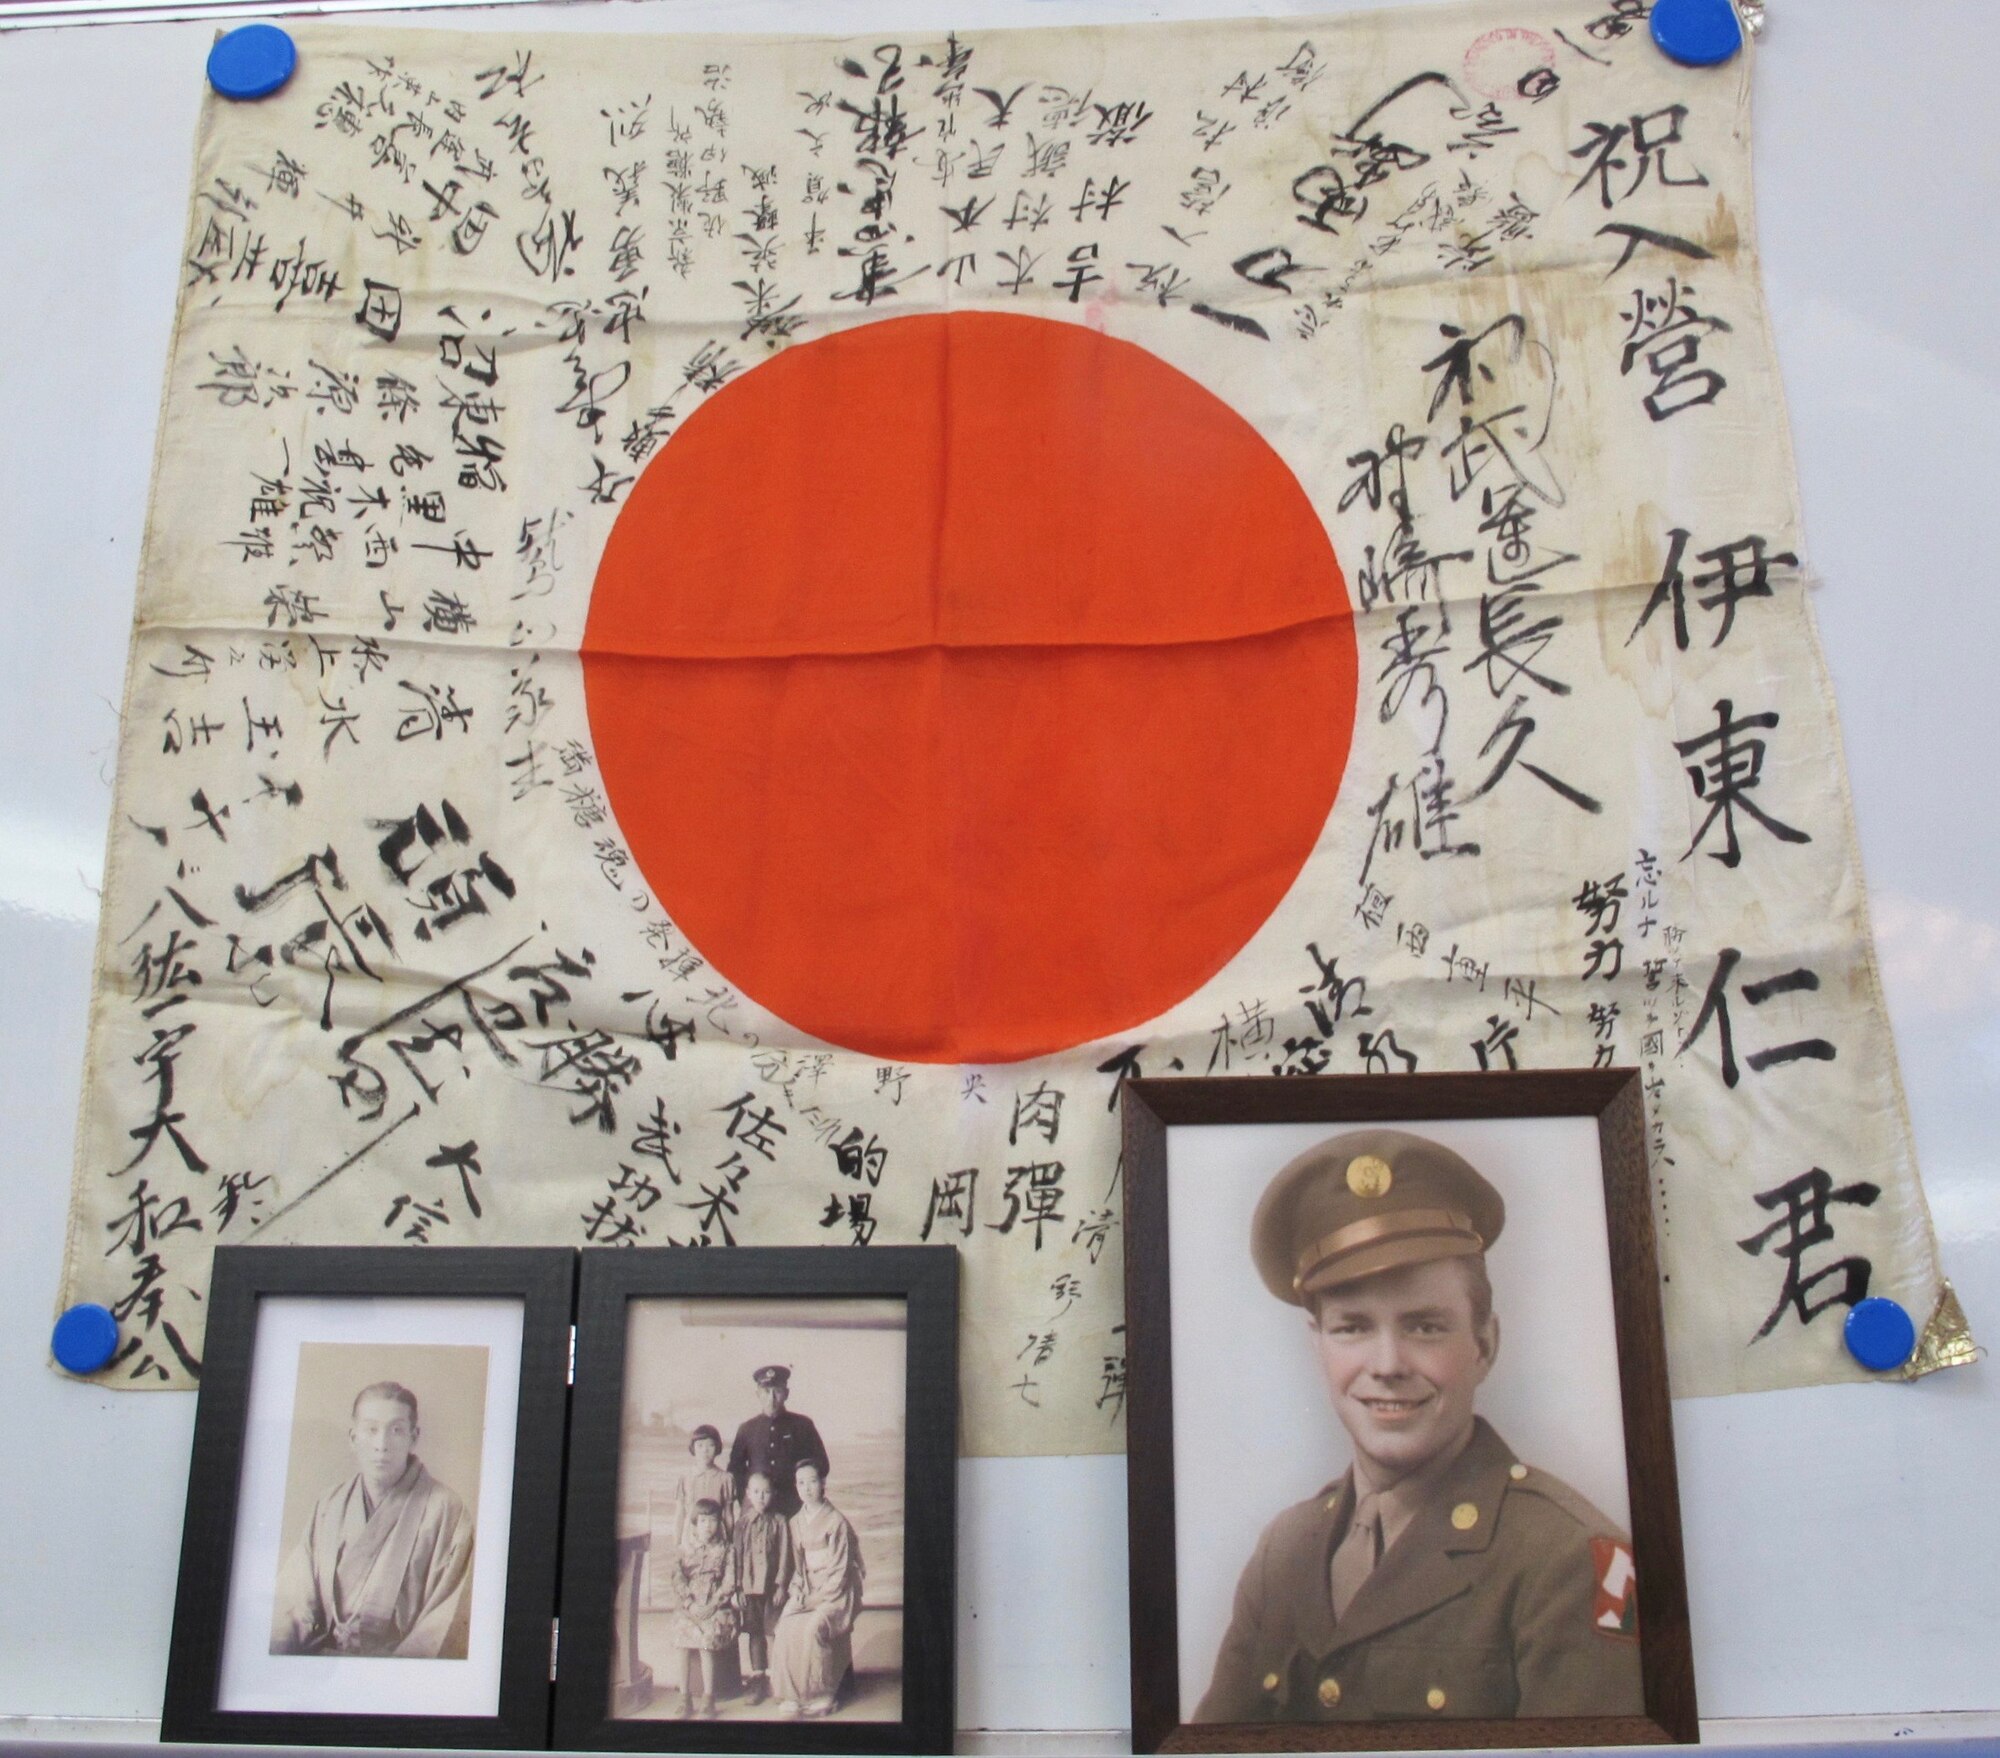 Photos of Masashi Ito (left) and Cpl. Lowell Armstrong (right) sit on display with a Japanese war flag during a flag return ceremony in Takasaki, Japan, Feb. 14, 2019. Armstrong acquired the flag during World War II. U.S. Air Force Senior Master Sgt. William Armstrong, 8th Logistics Readiness Squadron deployment and distribution flight superintendent and Cpl. Armstrong’s grandson, traveled to Japan and returned the flag to Ito’s nephews, Michio Miki and Hideo Ito. (Courtesy photo, Obon Society)